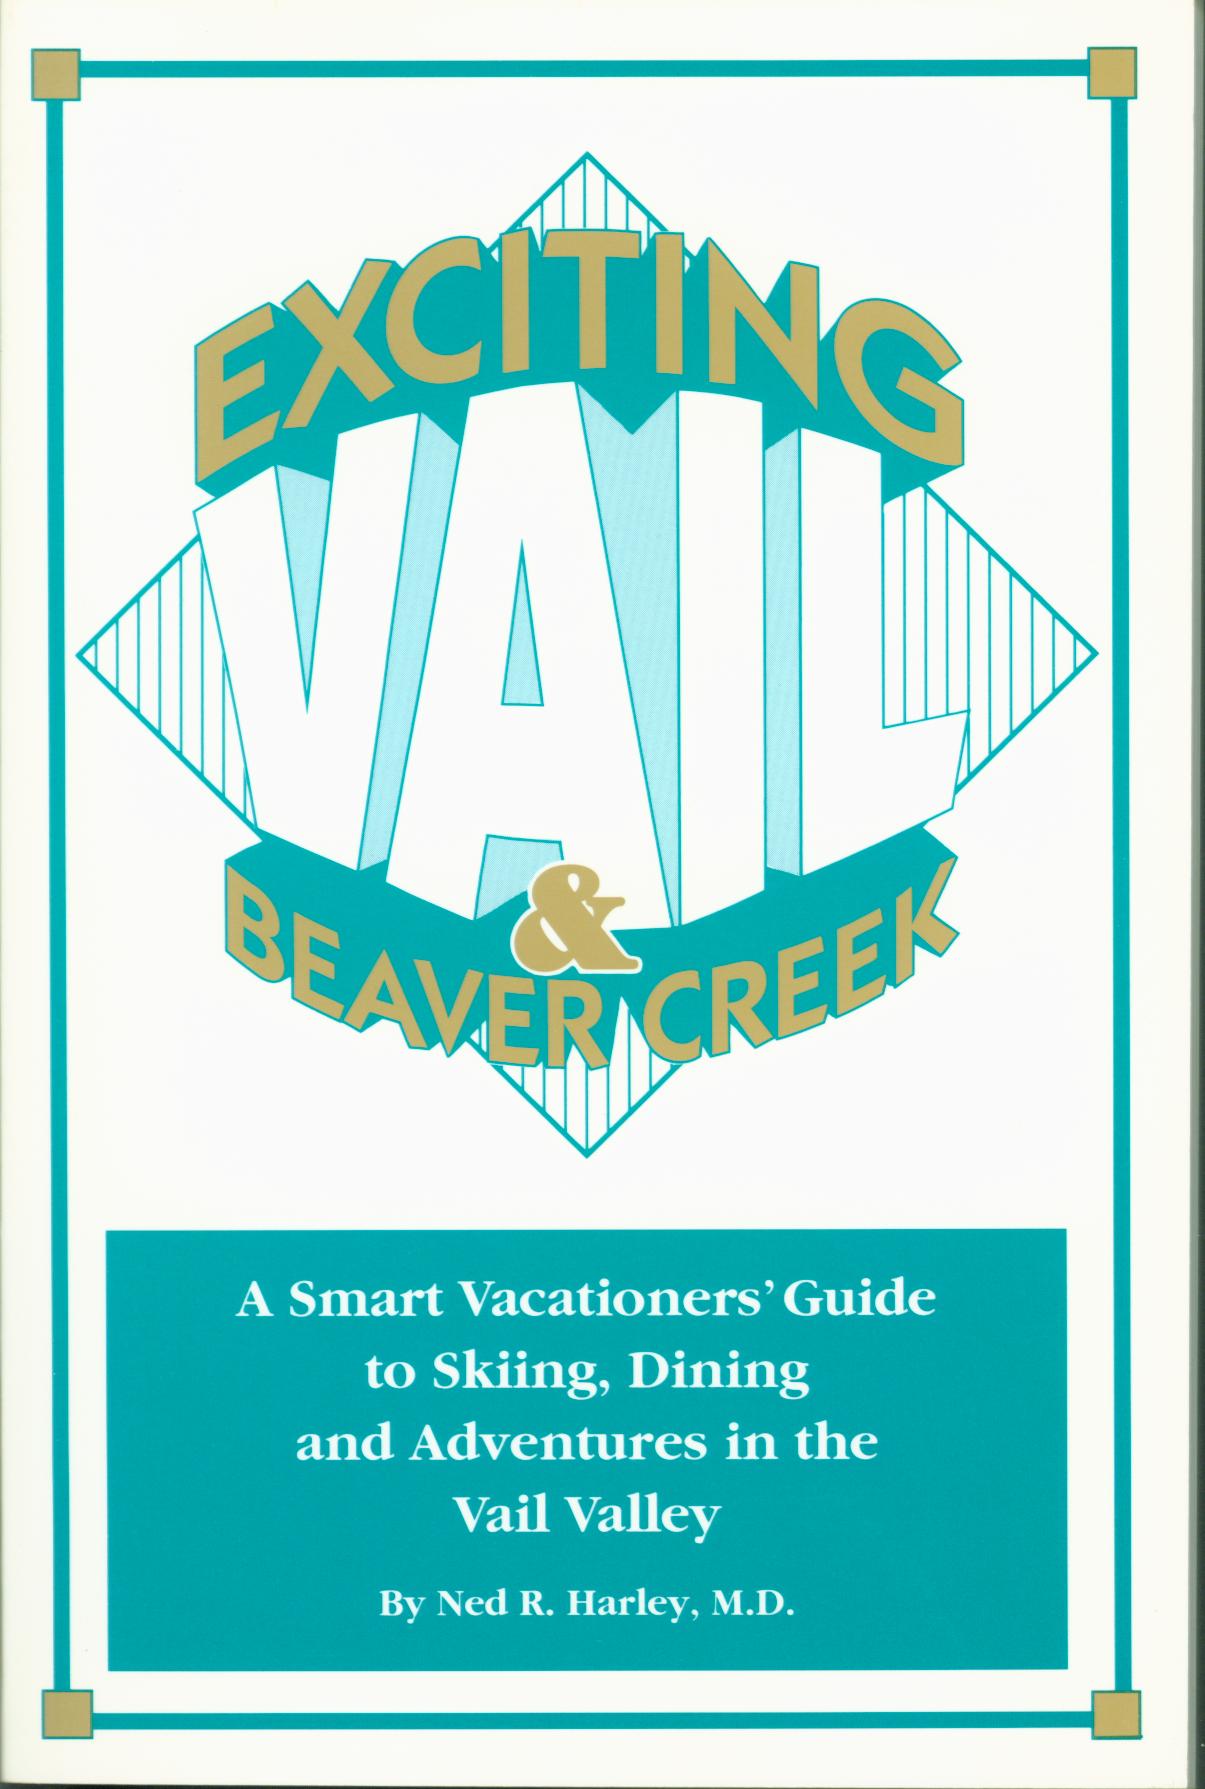 EXCITING VAIL & BEAVER CREEK: a smart vacationer's guide to skiing, dining, and adventures in the Vail Valley. 